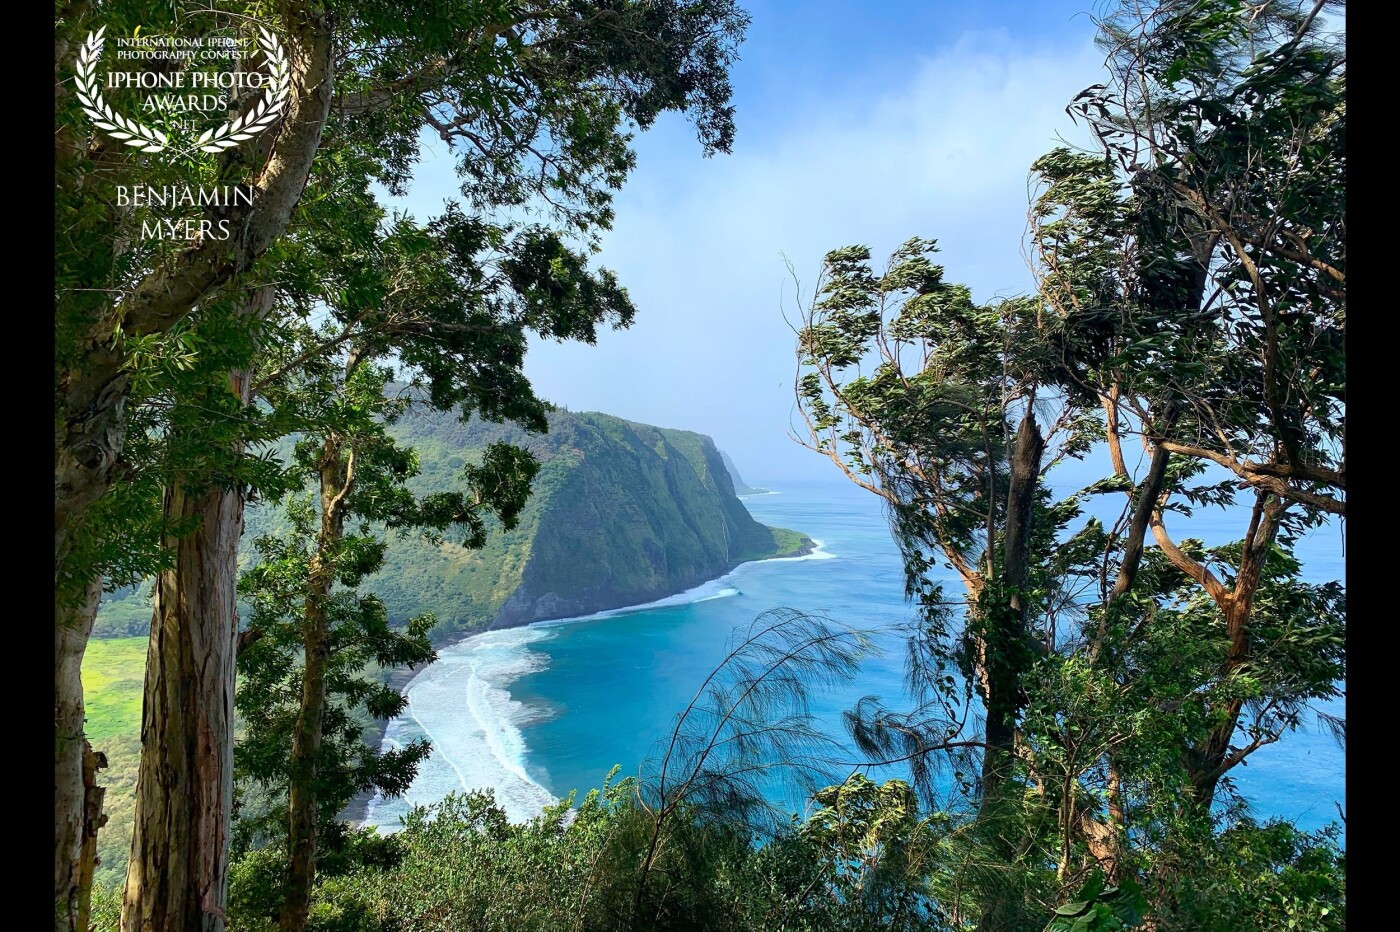 This shot was taken at the lookout over Waipi’o Valley on the Big Island. The valley is beautiful and can only be accessed by four-wheel-drive due to the steepness of the road to travel in and out of the valley itself. 